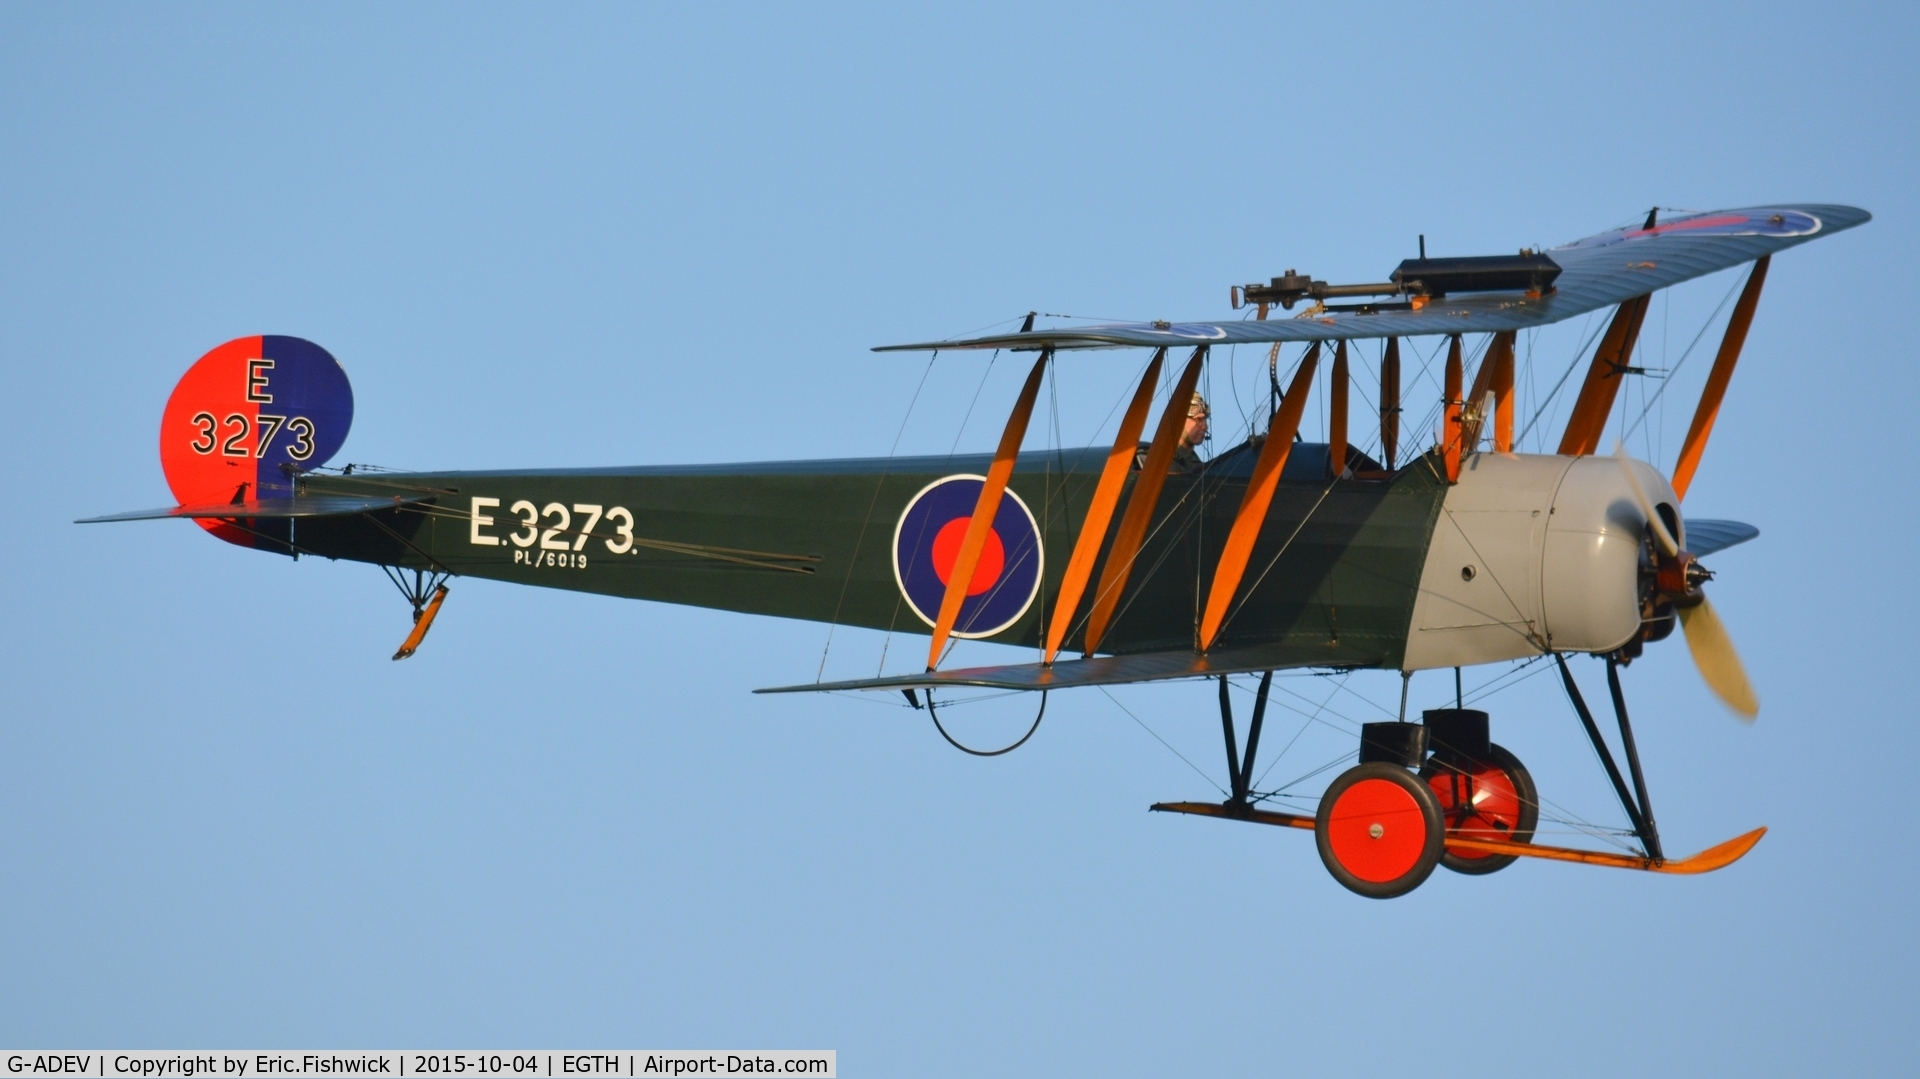 G-ADEV, 1918 Avro 504K C/N R3/LE/61400, 42. E3273 in display mode at The Shuttleworth 'Uncovered' Airshow (Finale,) Oct. 2015.